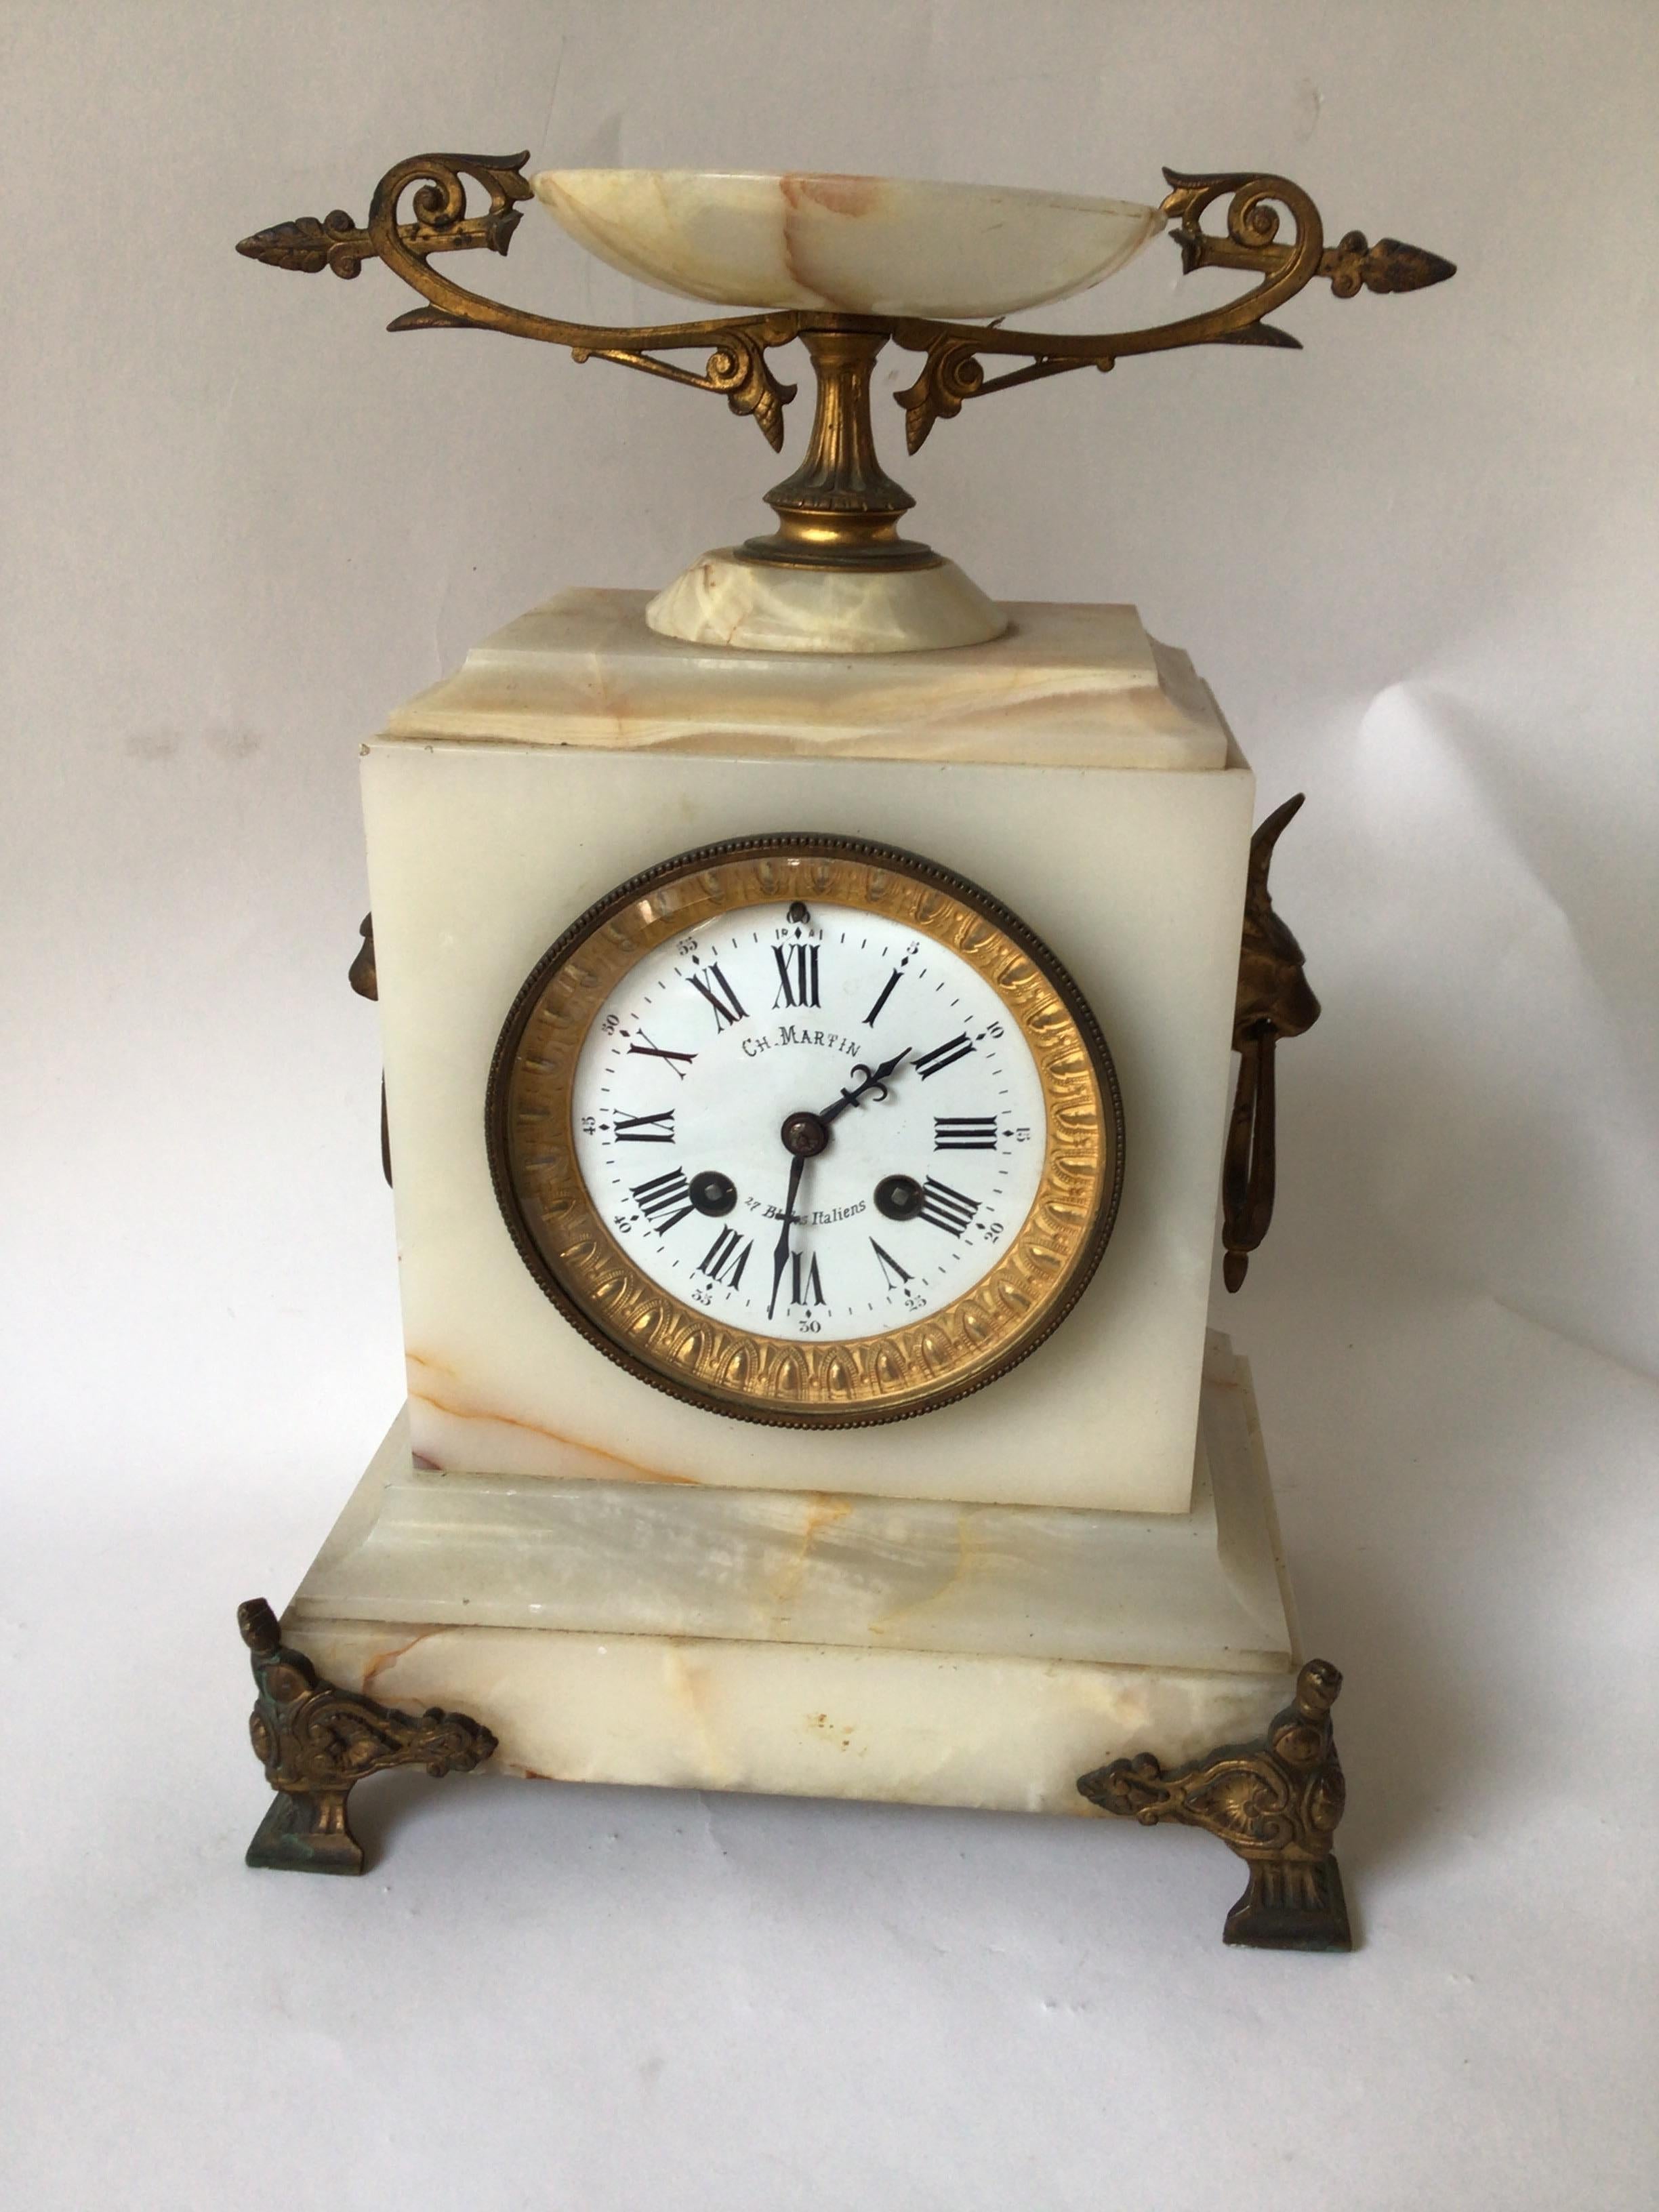 1870s French onyx mantle clock by CH Martin. Enamel face. I didn’t try to see if clock works, I assume it doesn’t.